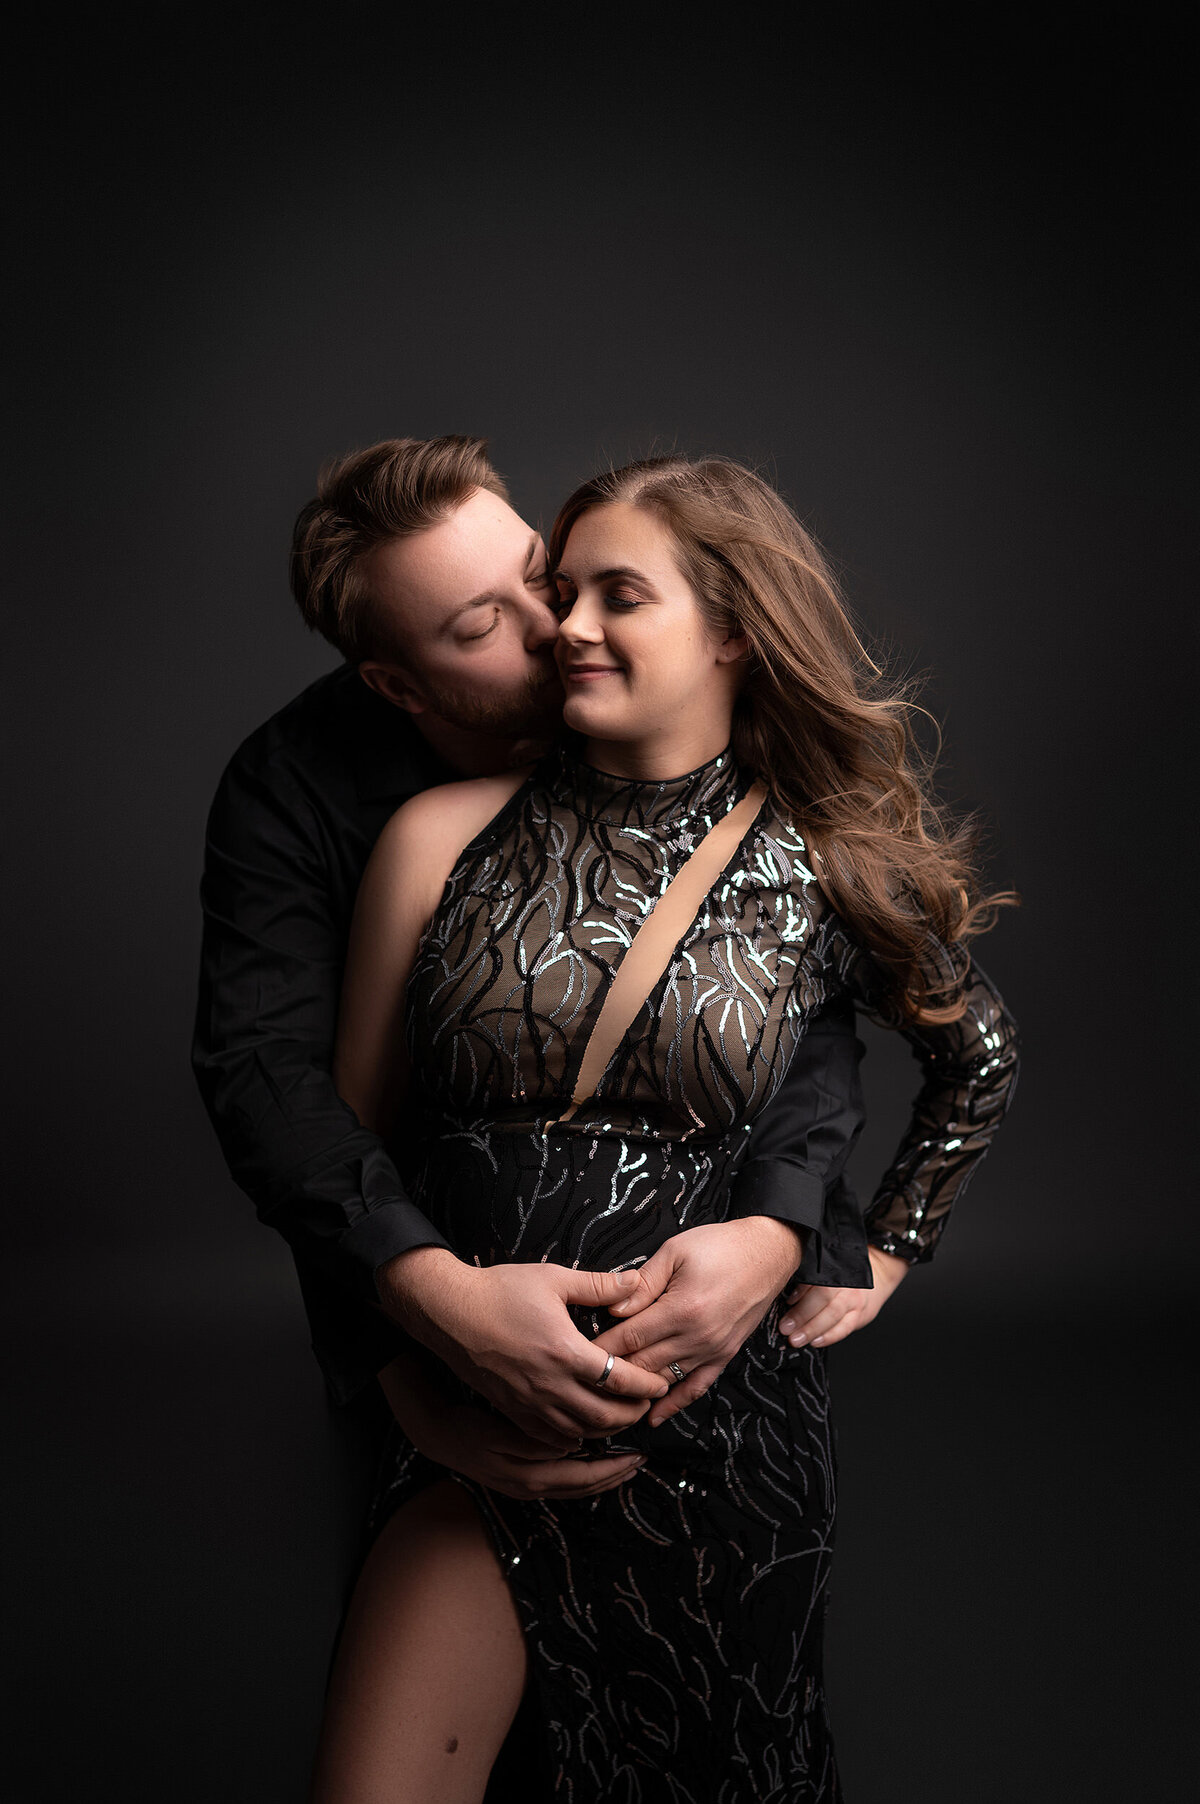 Pregnant woman in edgy black maternity gown looks to the side while her husband hugs her from behind and kisses her cheek.